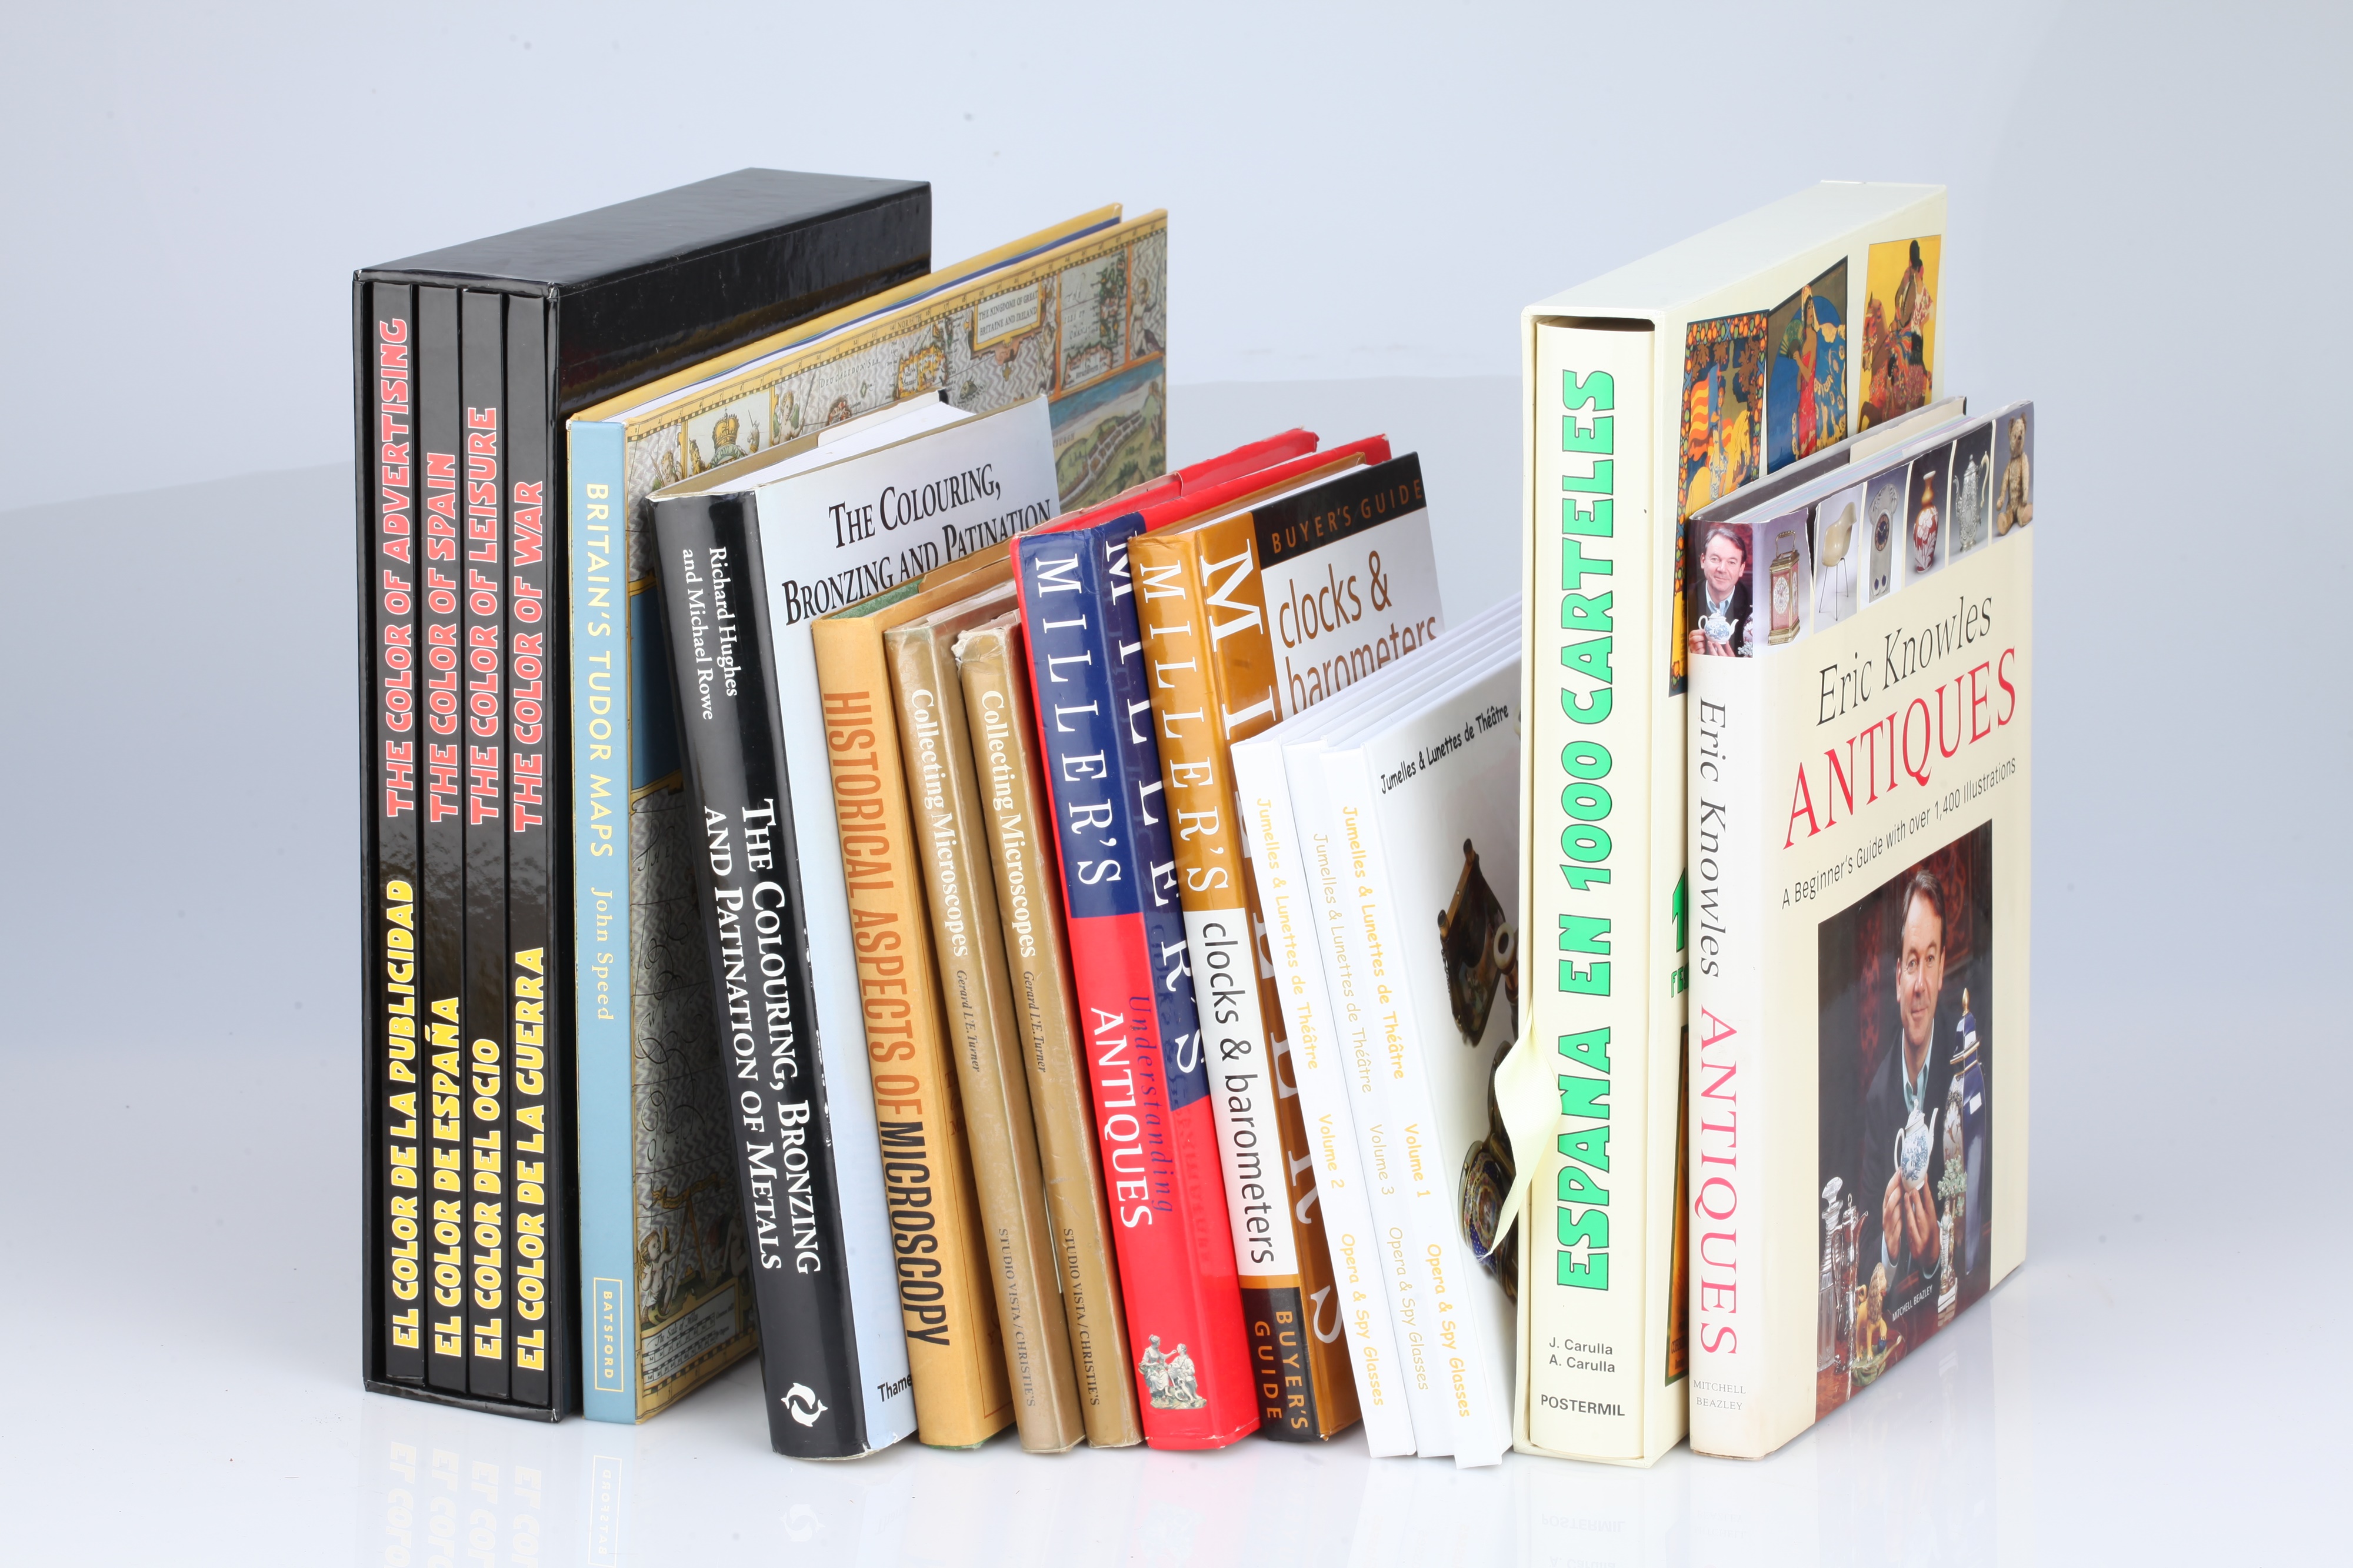 Collection of Modern Antique Books,